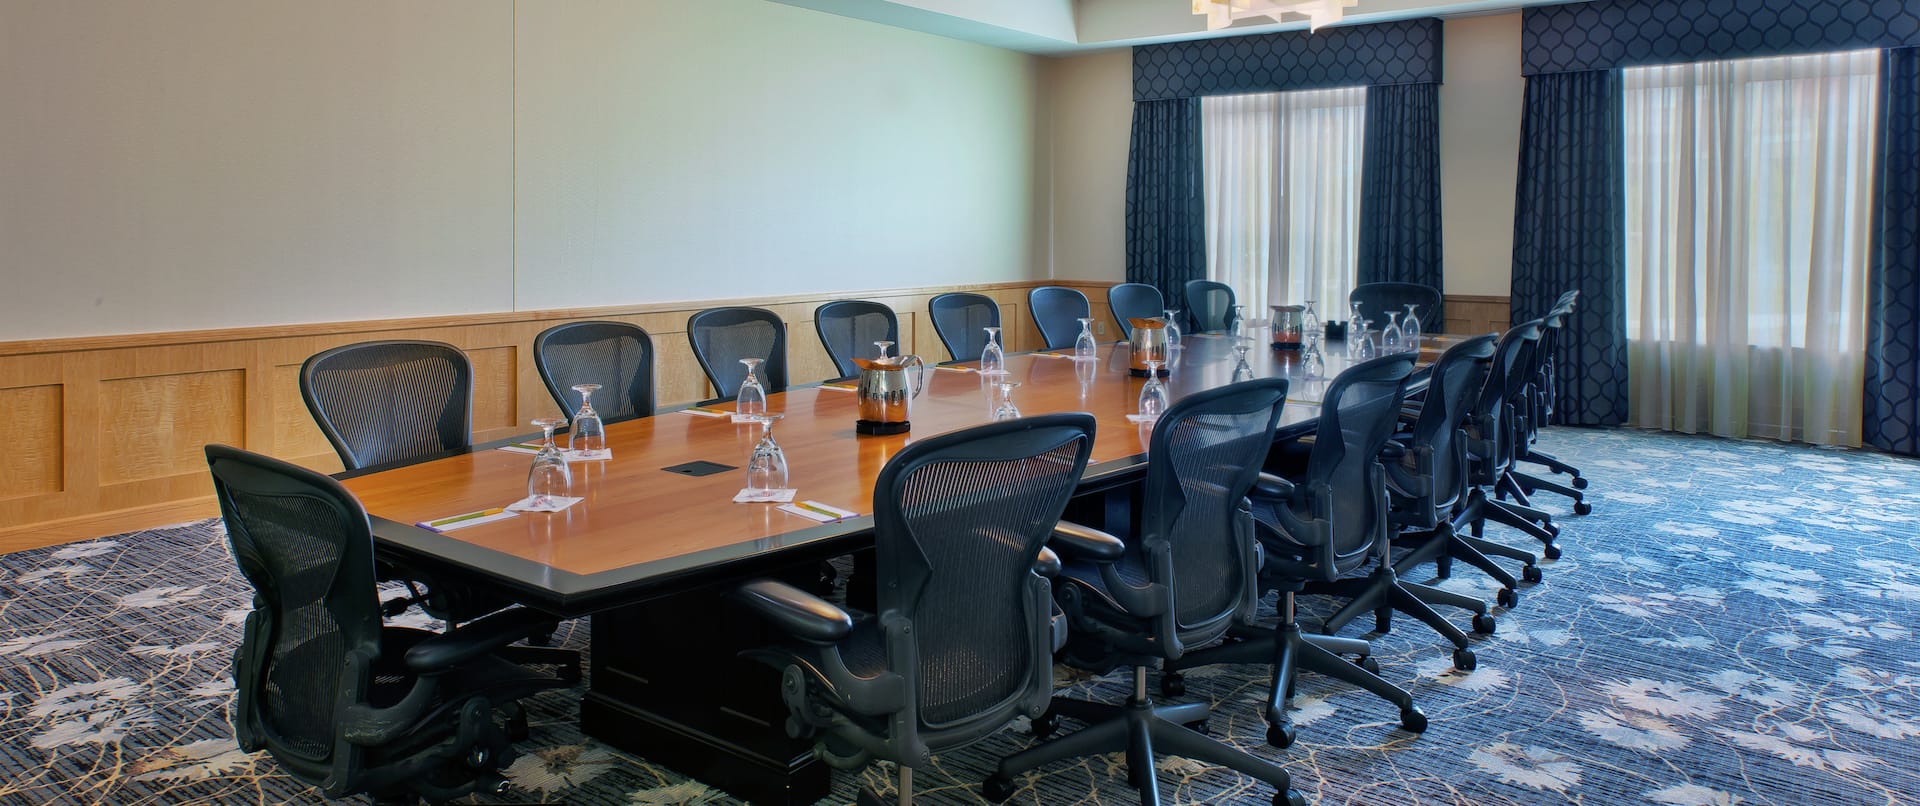 Windows With Long Drapes and Ergonomic Chairs at Table in Ariel Boardroom